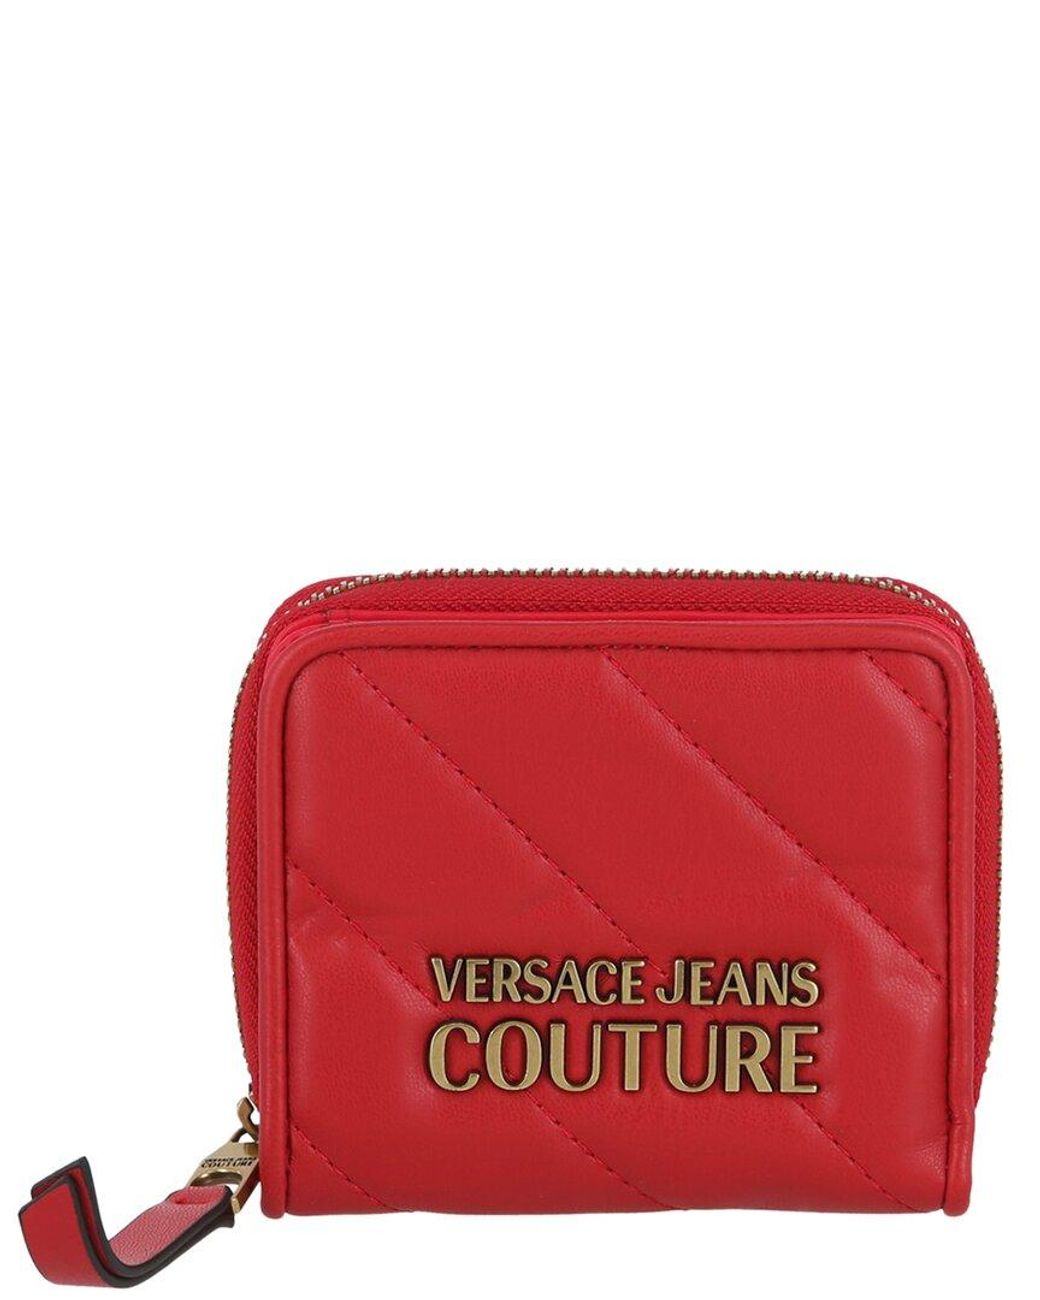 Versace Jeans Couture Wallet in Red | Canada